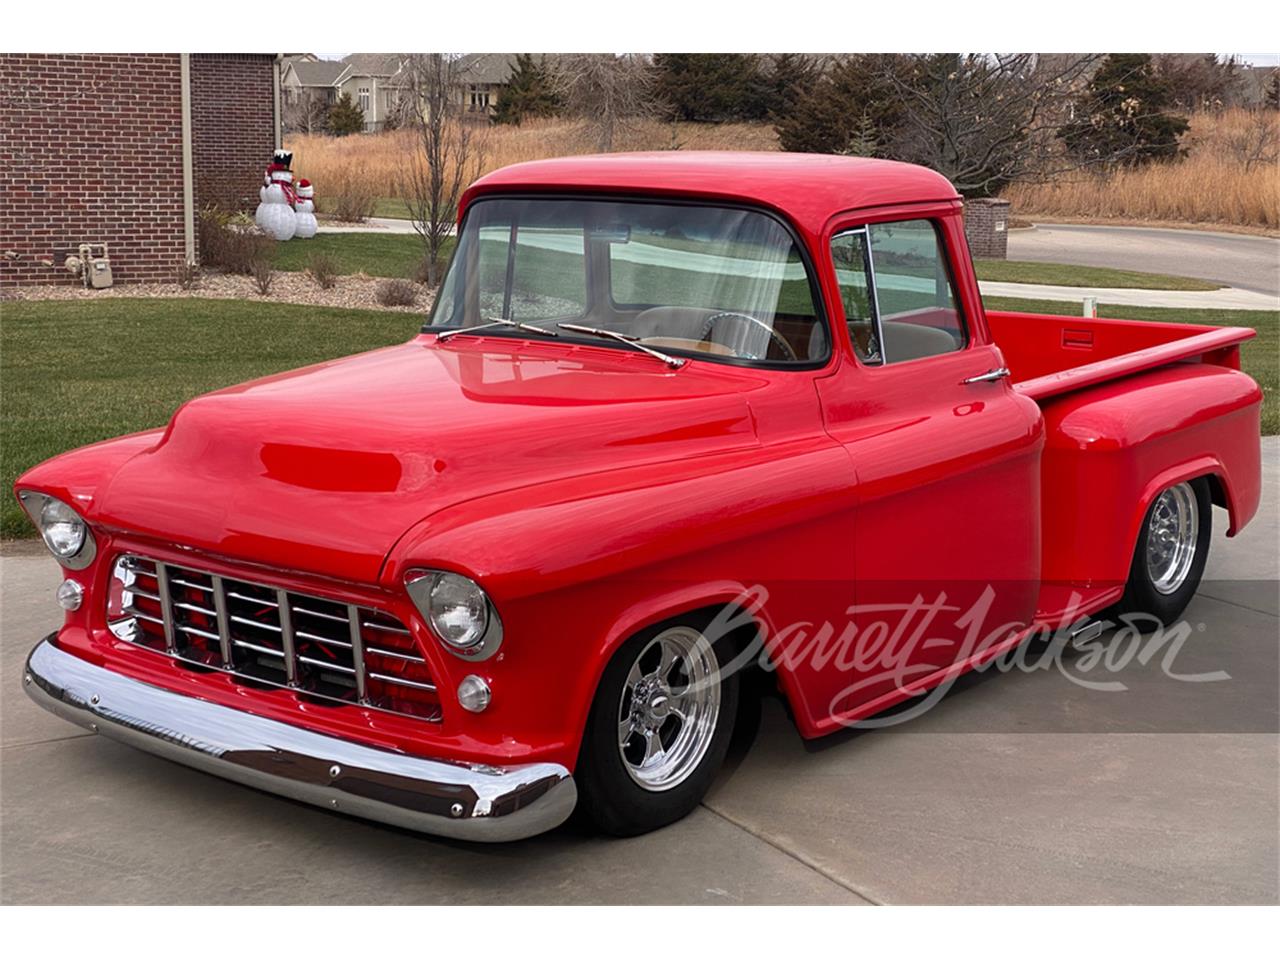 For Sale at Auction: 1955 Chevrolet 3100 in Las Vegas, Nevada for sale in Las Vegas, NV